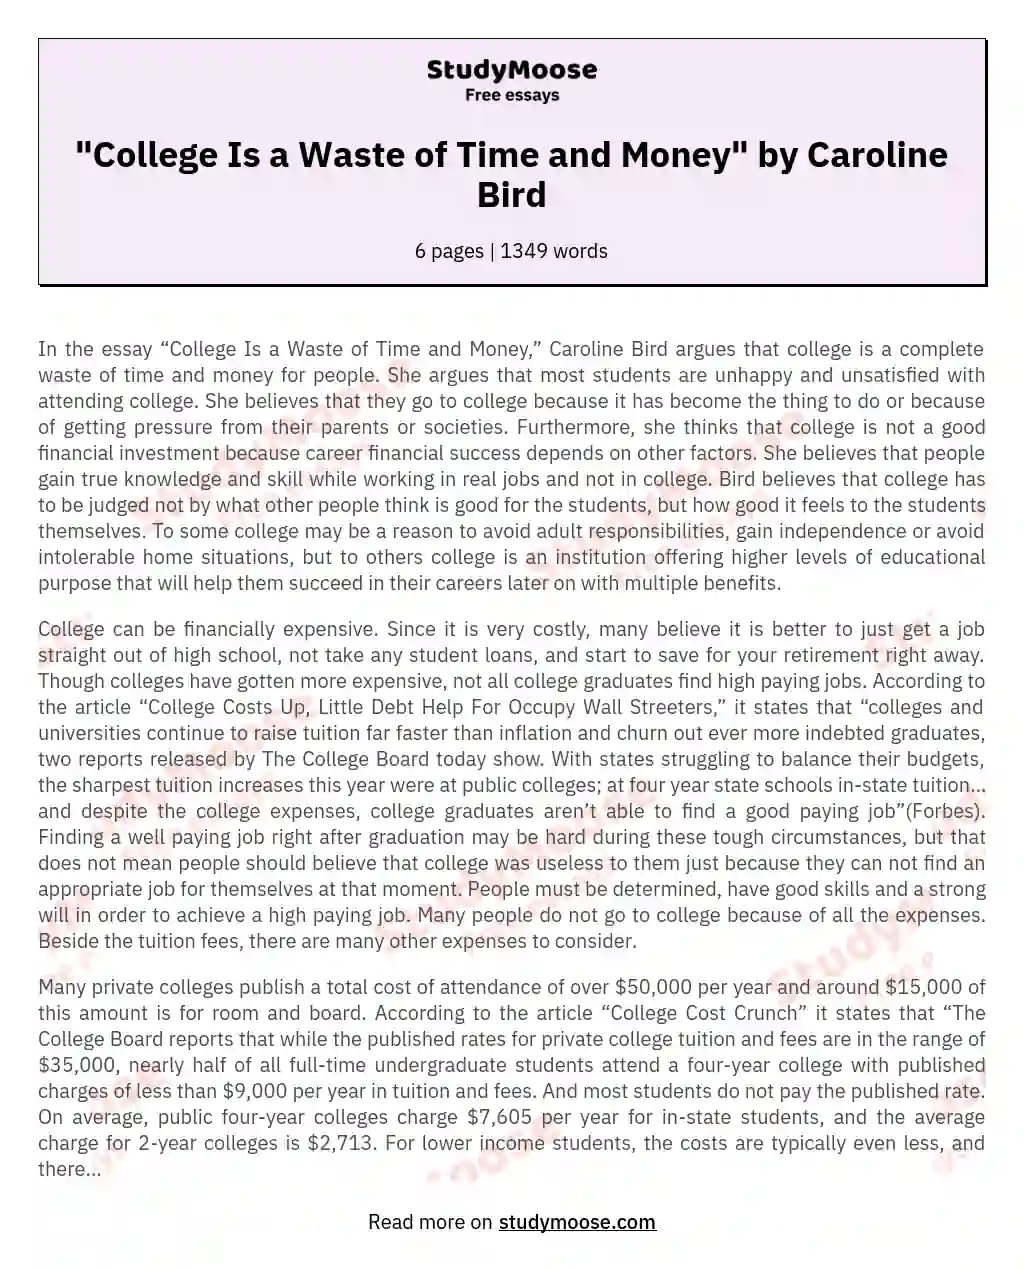 "College Is a Waste of Time and Money" by Caroline Bird essay